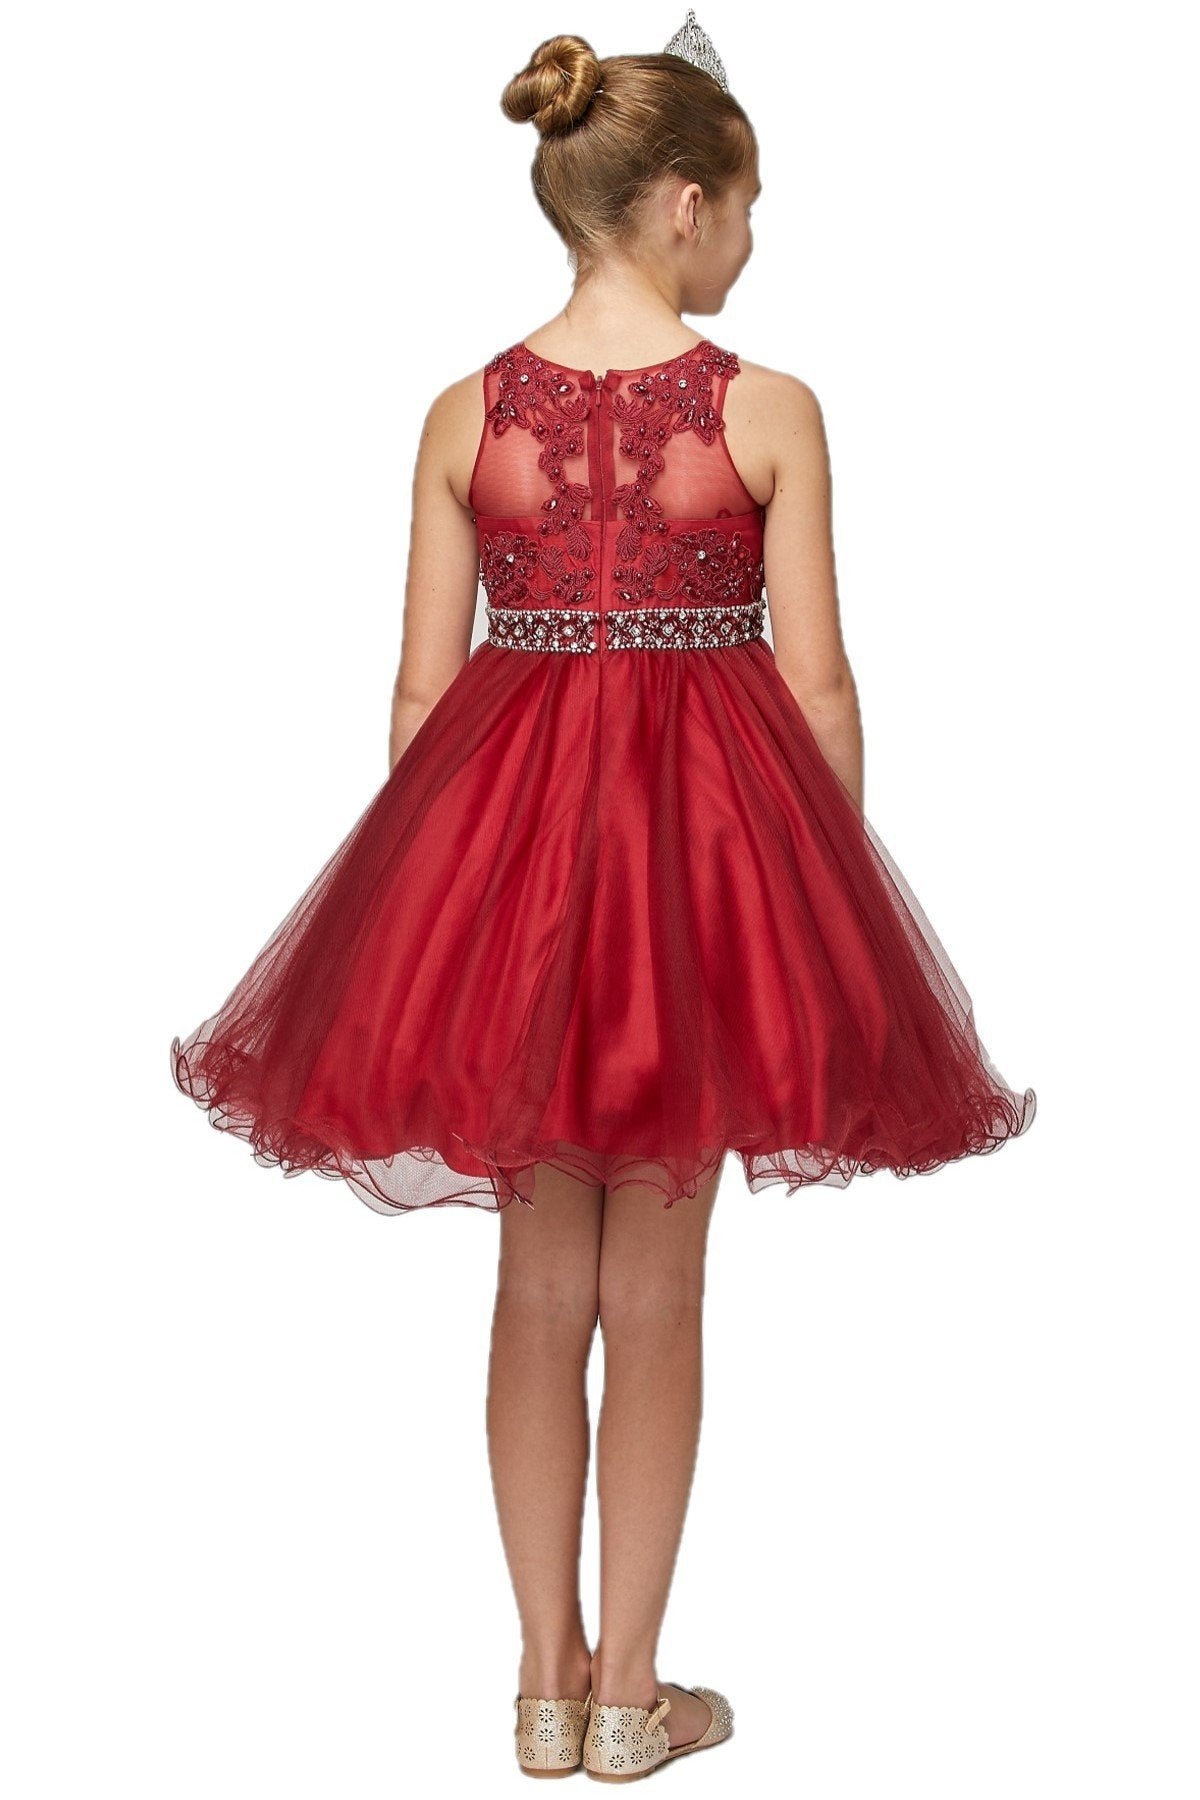 Rhinestone Pearl Beaded Lace Tulle Girl Party Dress by Cinderella Couture USA As5013